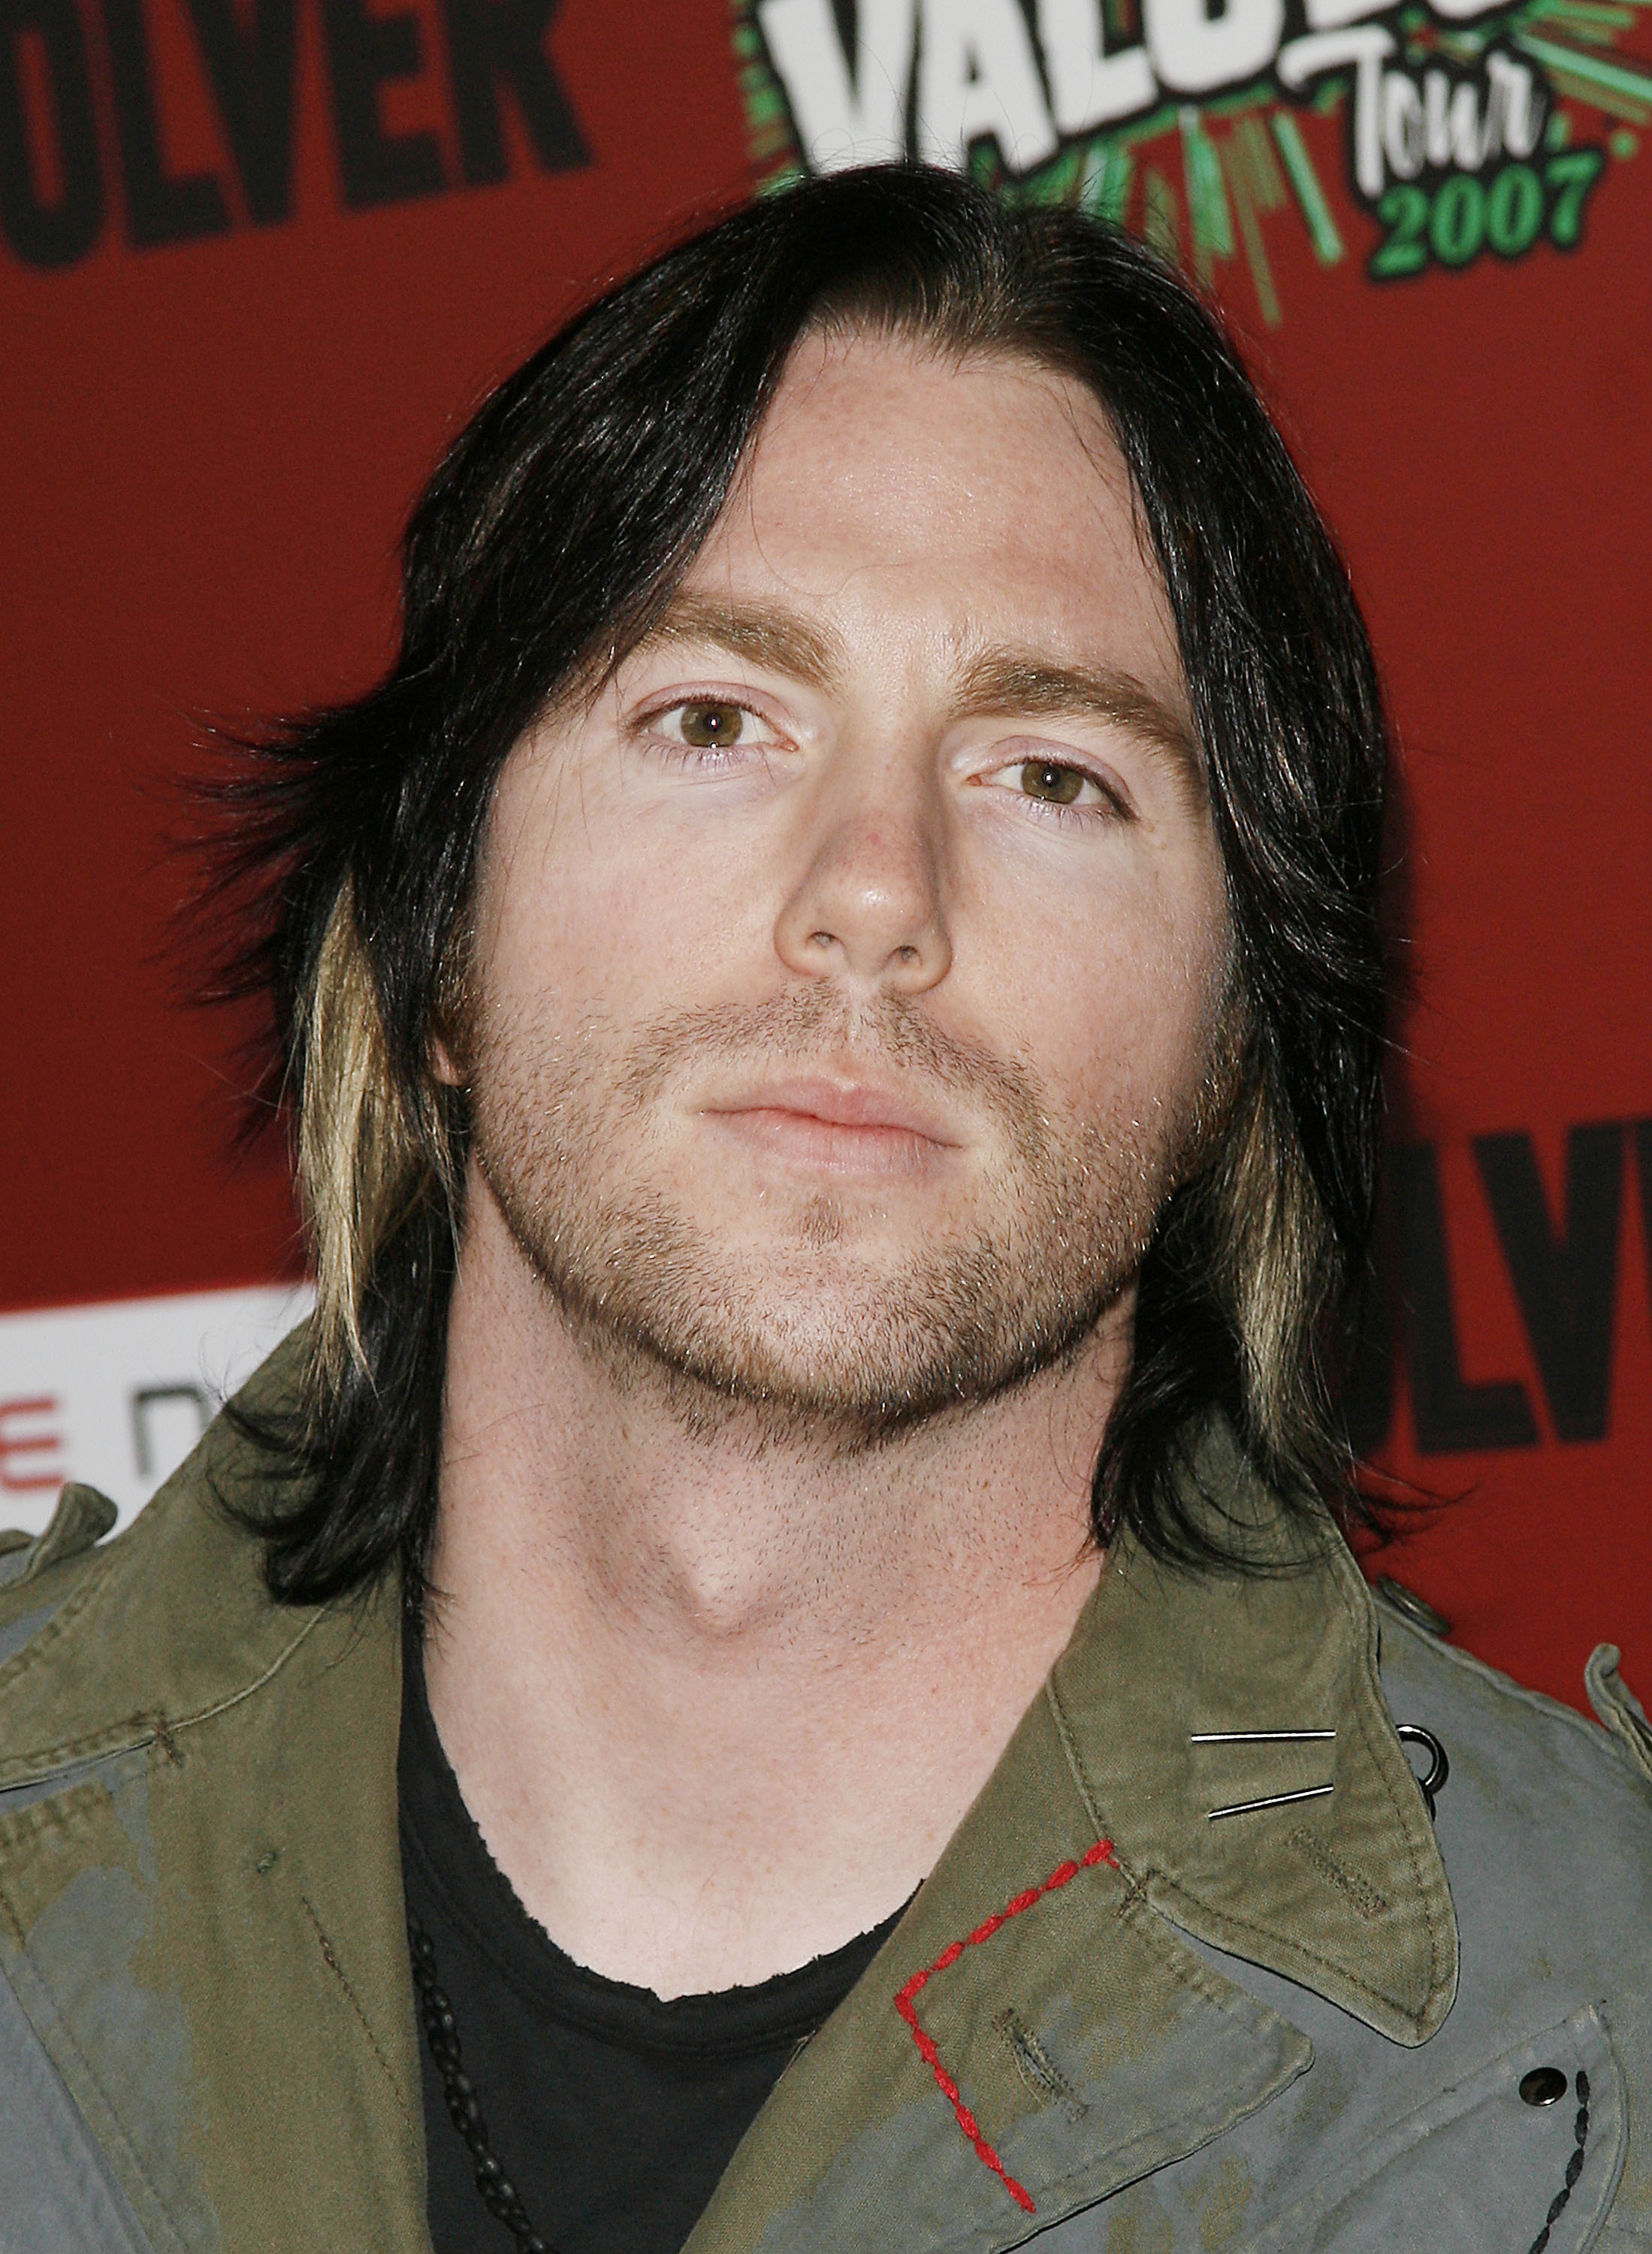 Elijay Blue Allman arrives at Korn's Family Values Tour Kickoff Party at Hollywood Forever Cemetery in Los Angeles, California on April 19, 2007. | Source: Getty Images